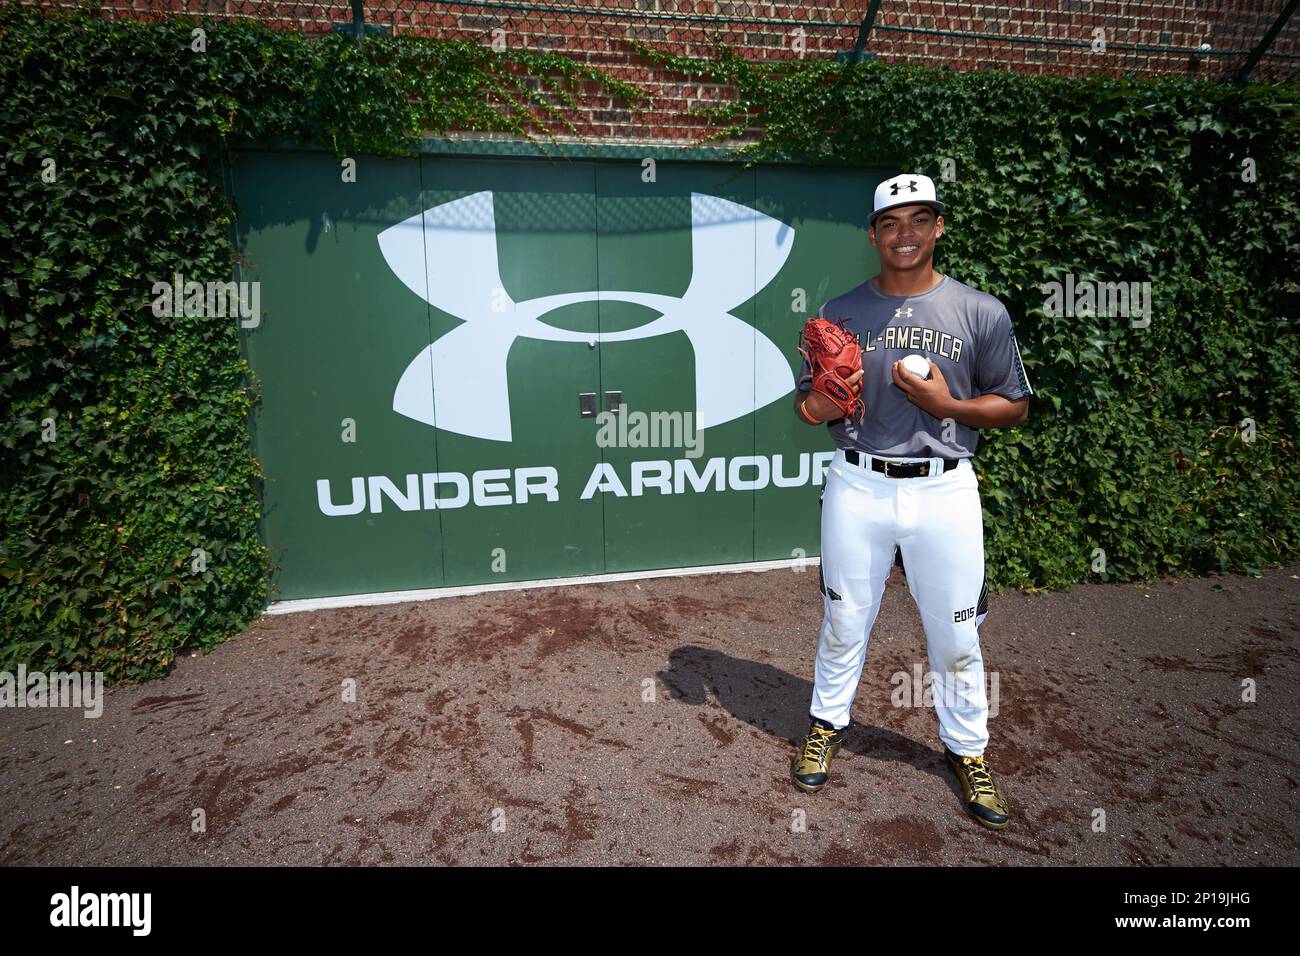 Jesus Luzardo (9) of Marjory Stoneman Douglas High School in Parkland,  Florida poses for a photo before the Under Armour All-American Game on  August 15, 2015 at Wrigley Field in Chicago, Illinois. (